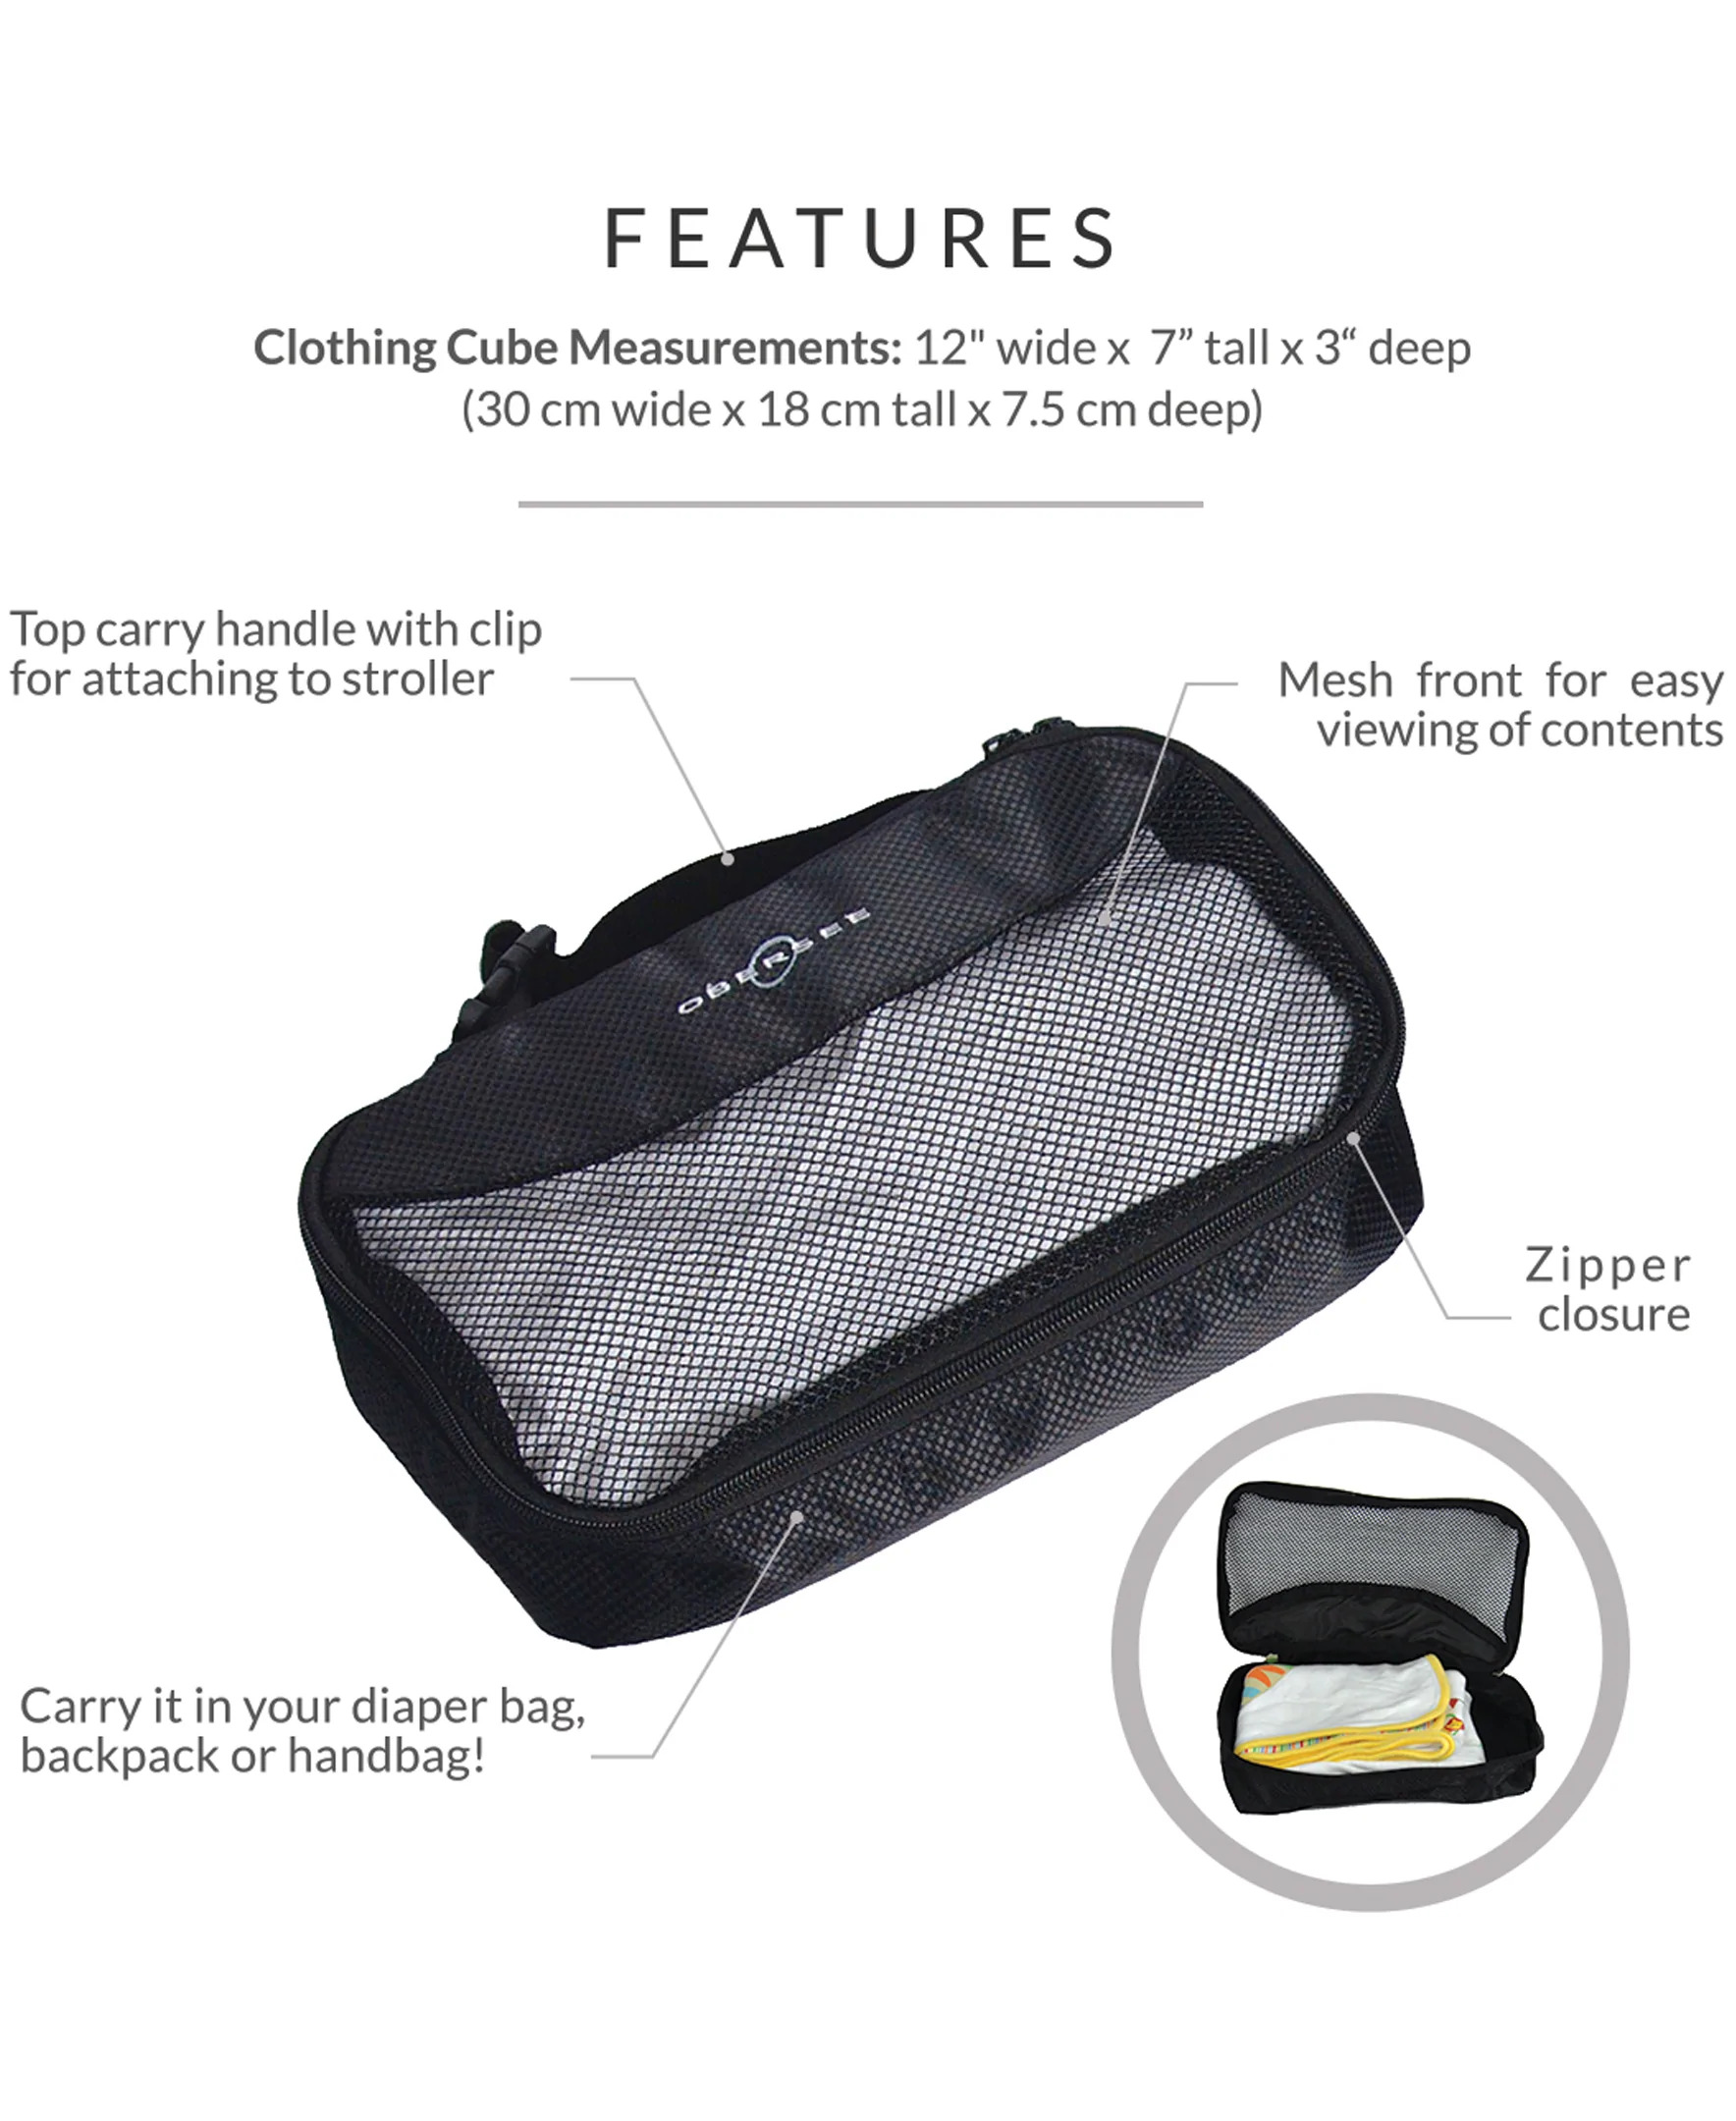 Obersee Diaper Bag Organizer Clothing Cube - image 1 of 2